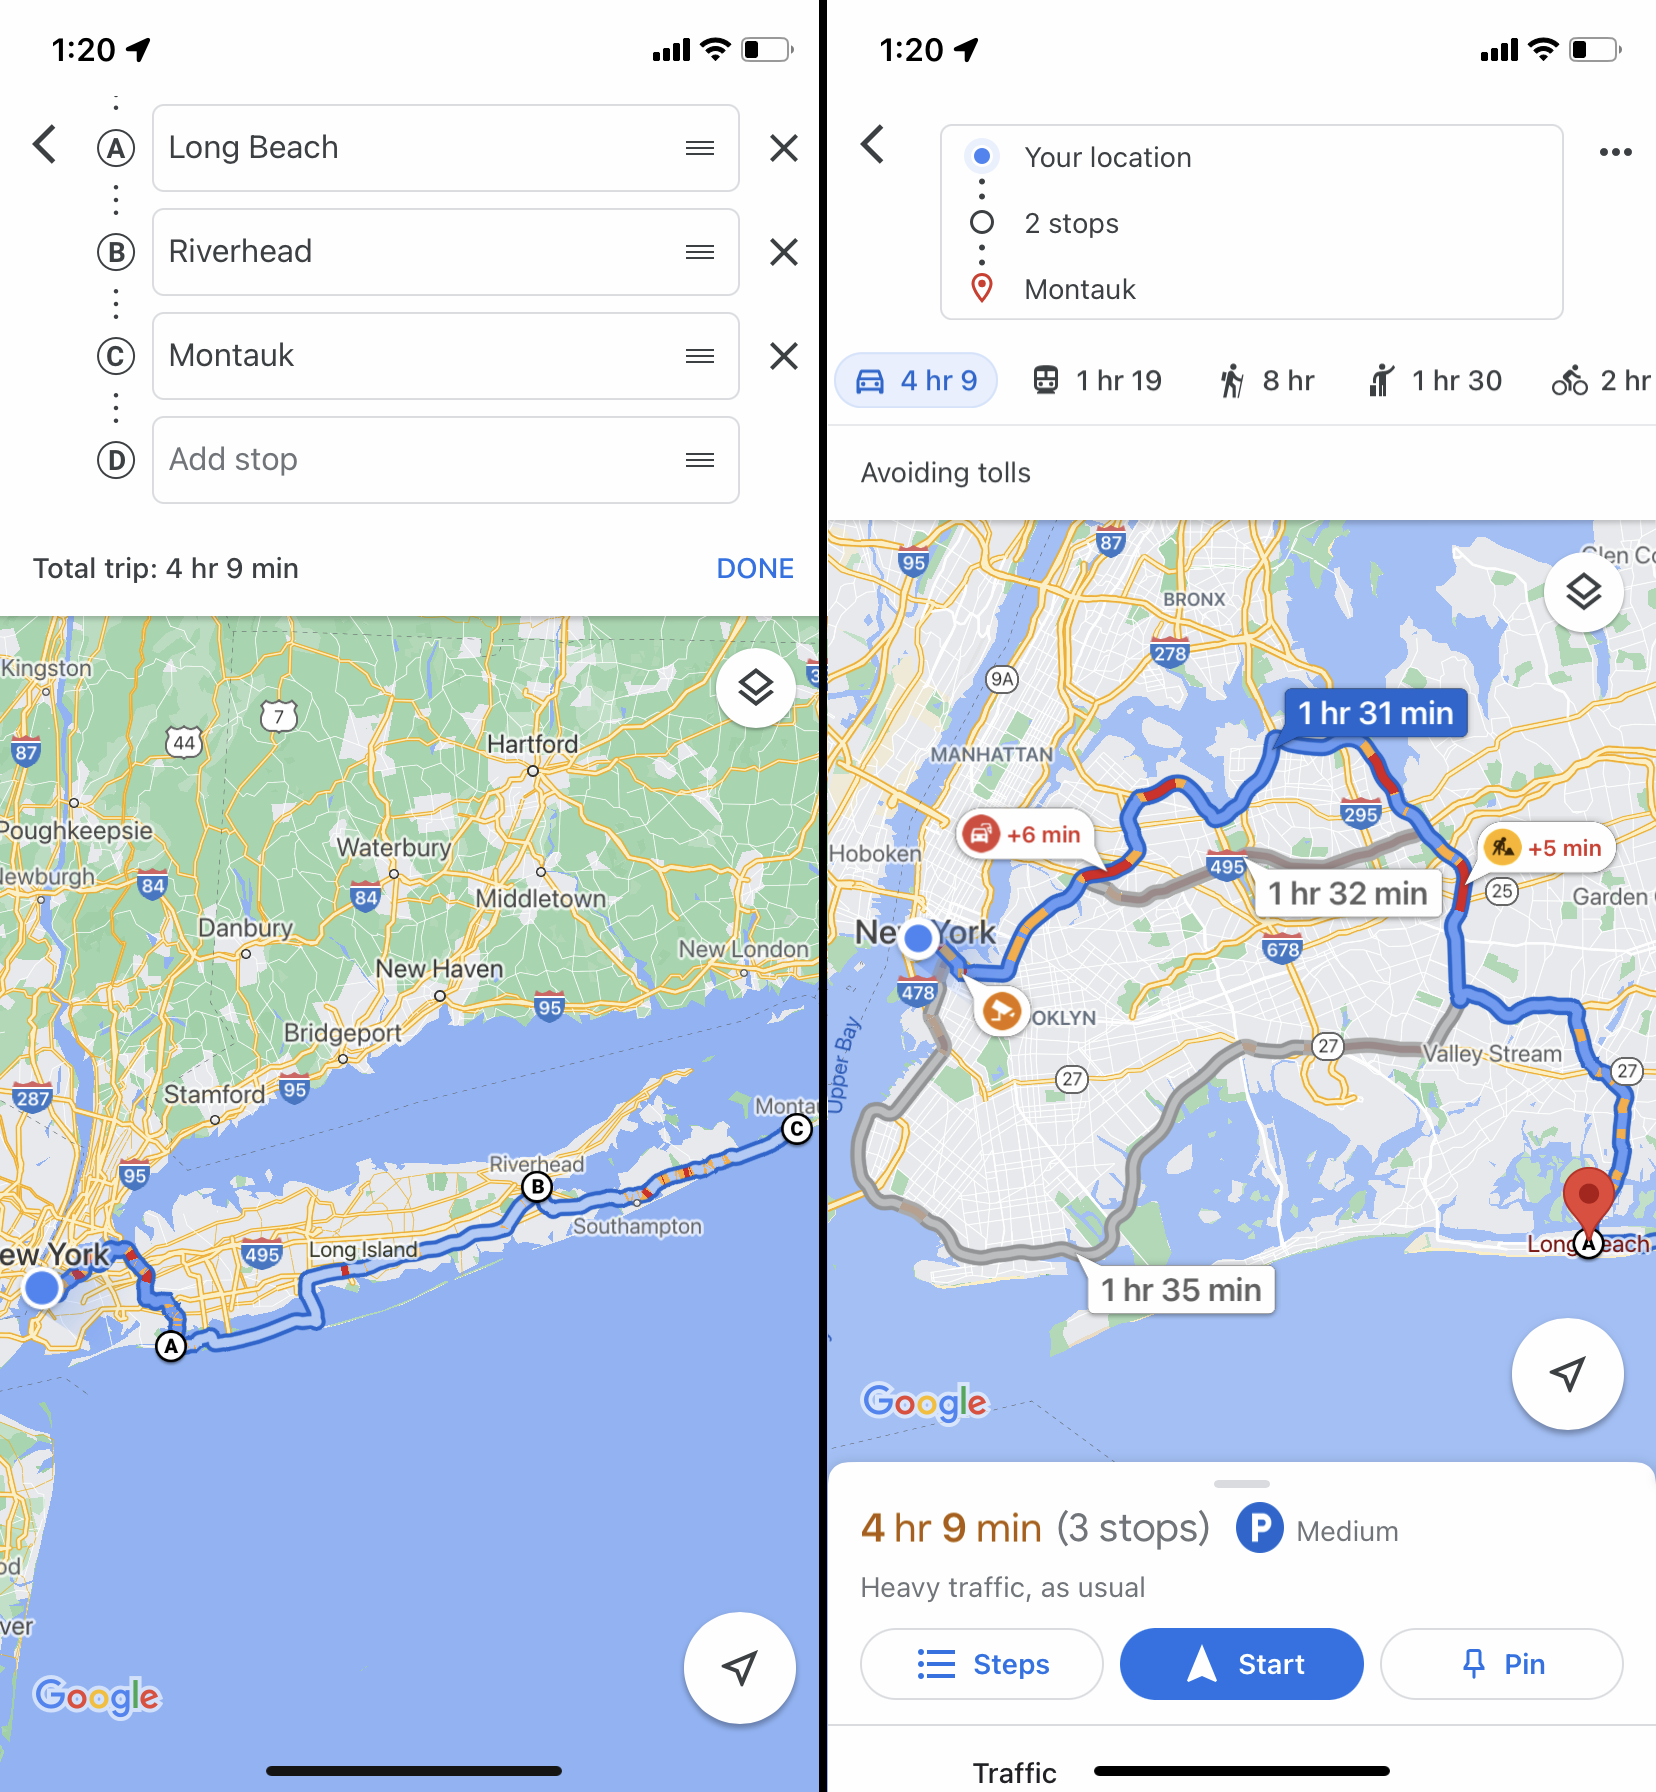 Two screenshots from the Google Maps app, showing a navigation route with multiple stops.